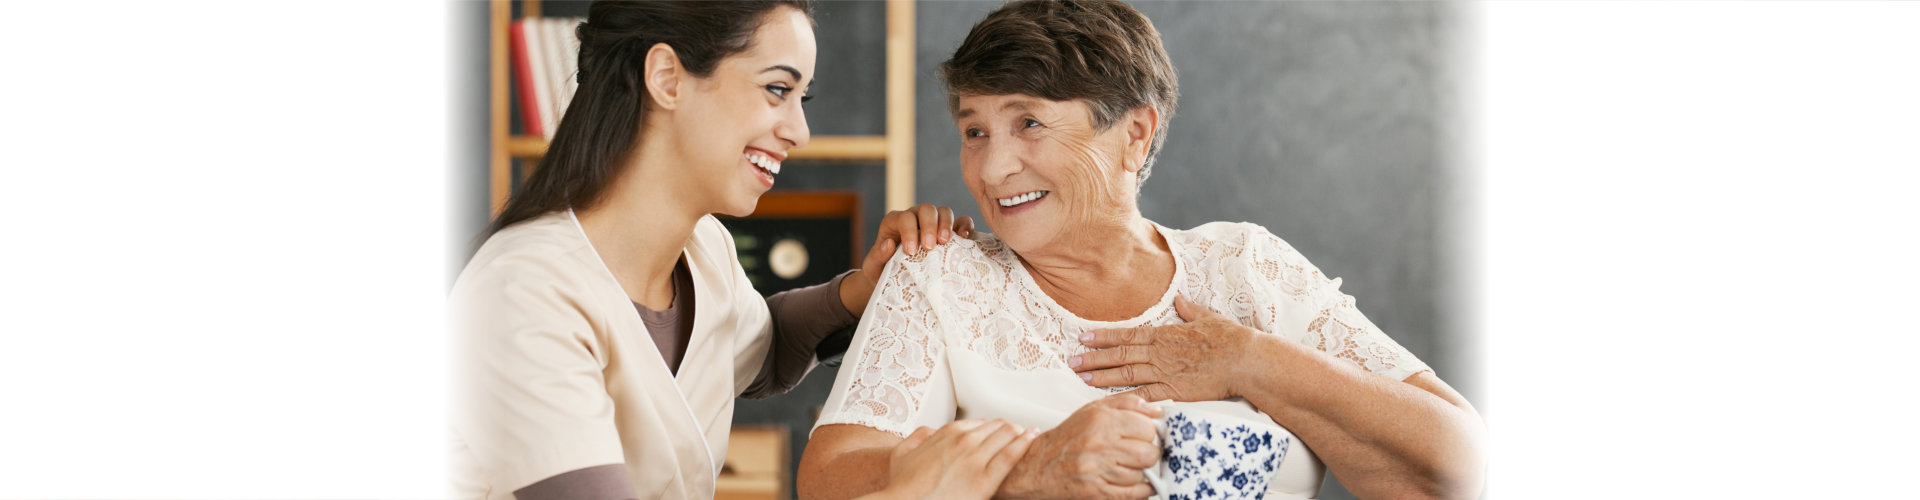 caregiver smiling at an elderly woman